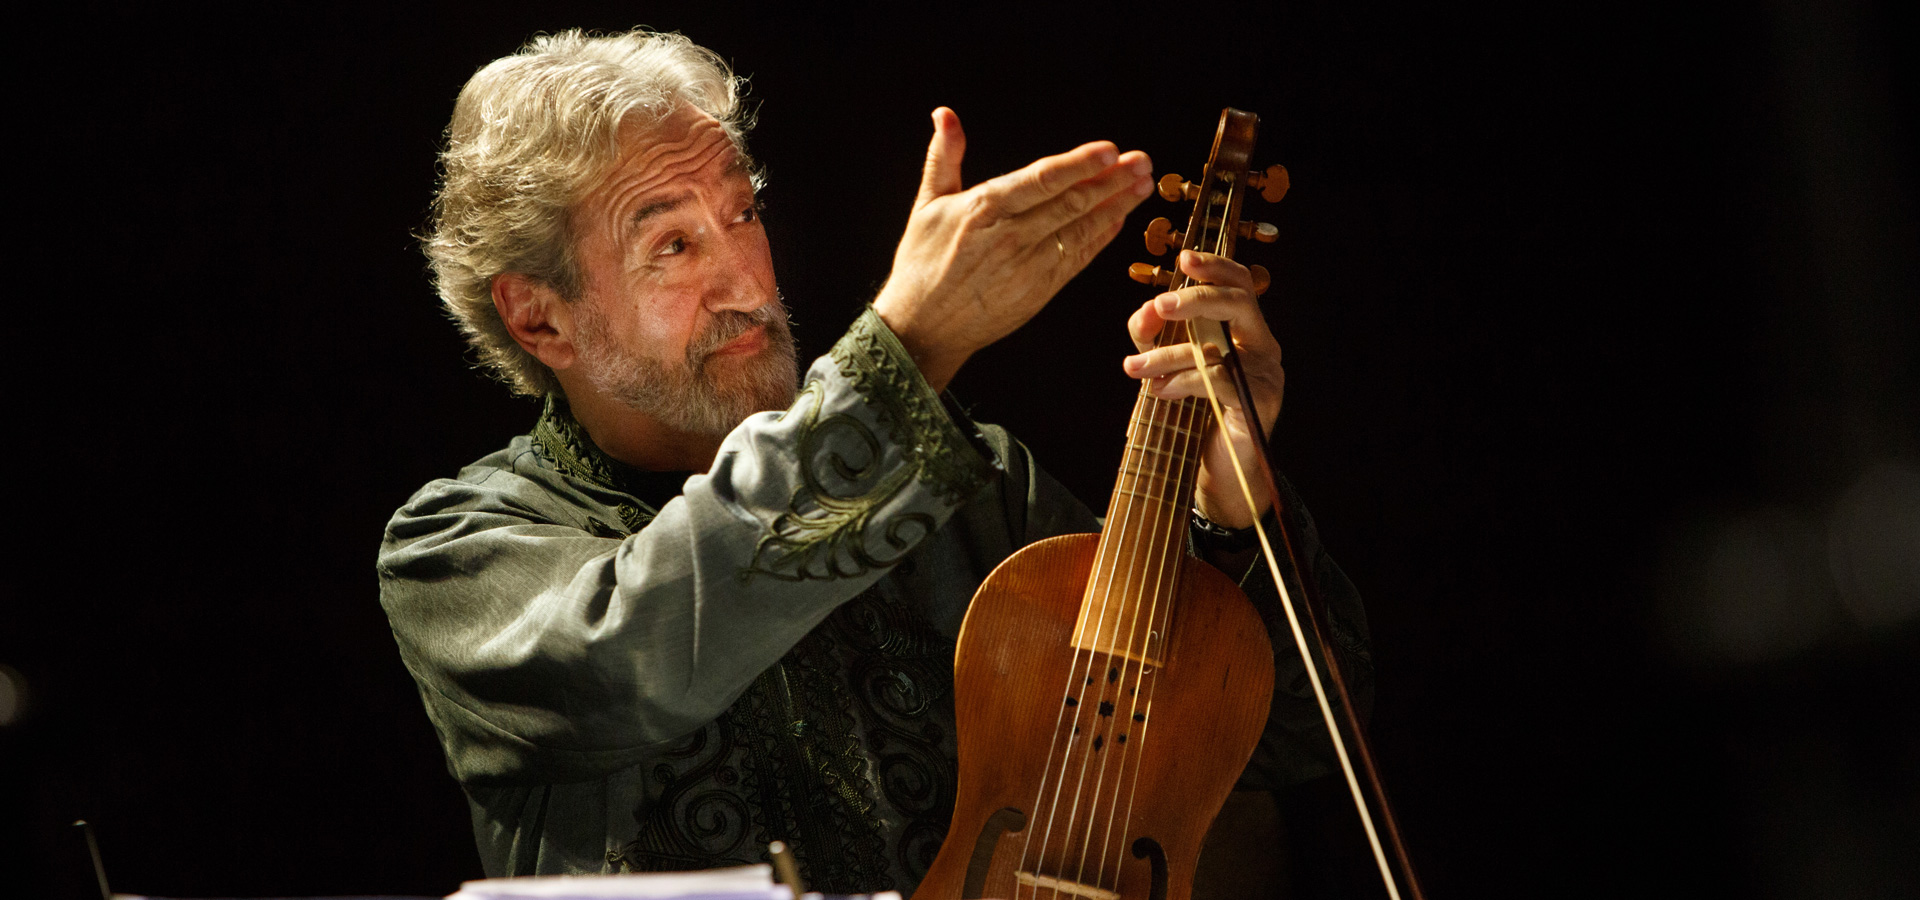 Spanish conducter and composer Jordi Savall shown against a dark background, holding his viol in one hand and raising his other in a gesture to the audience.